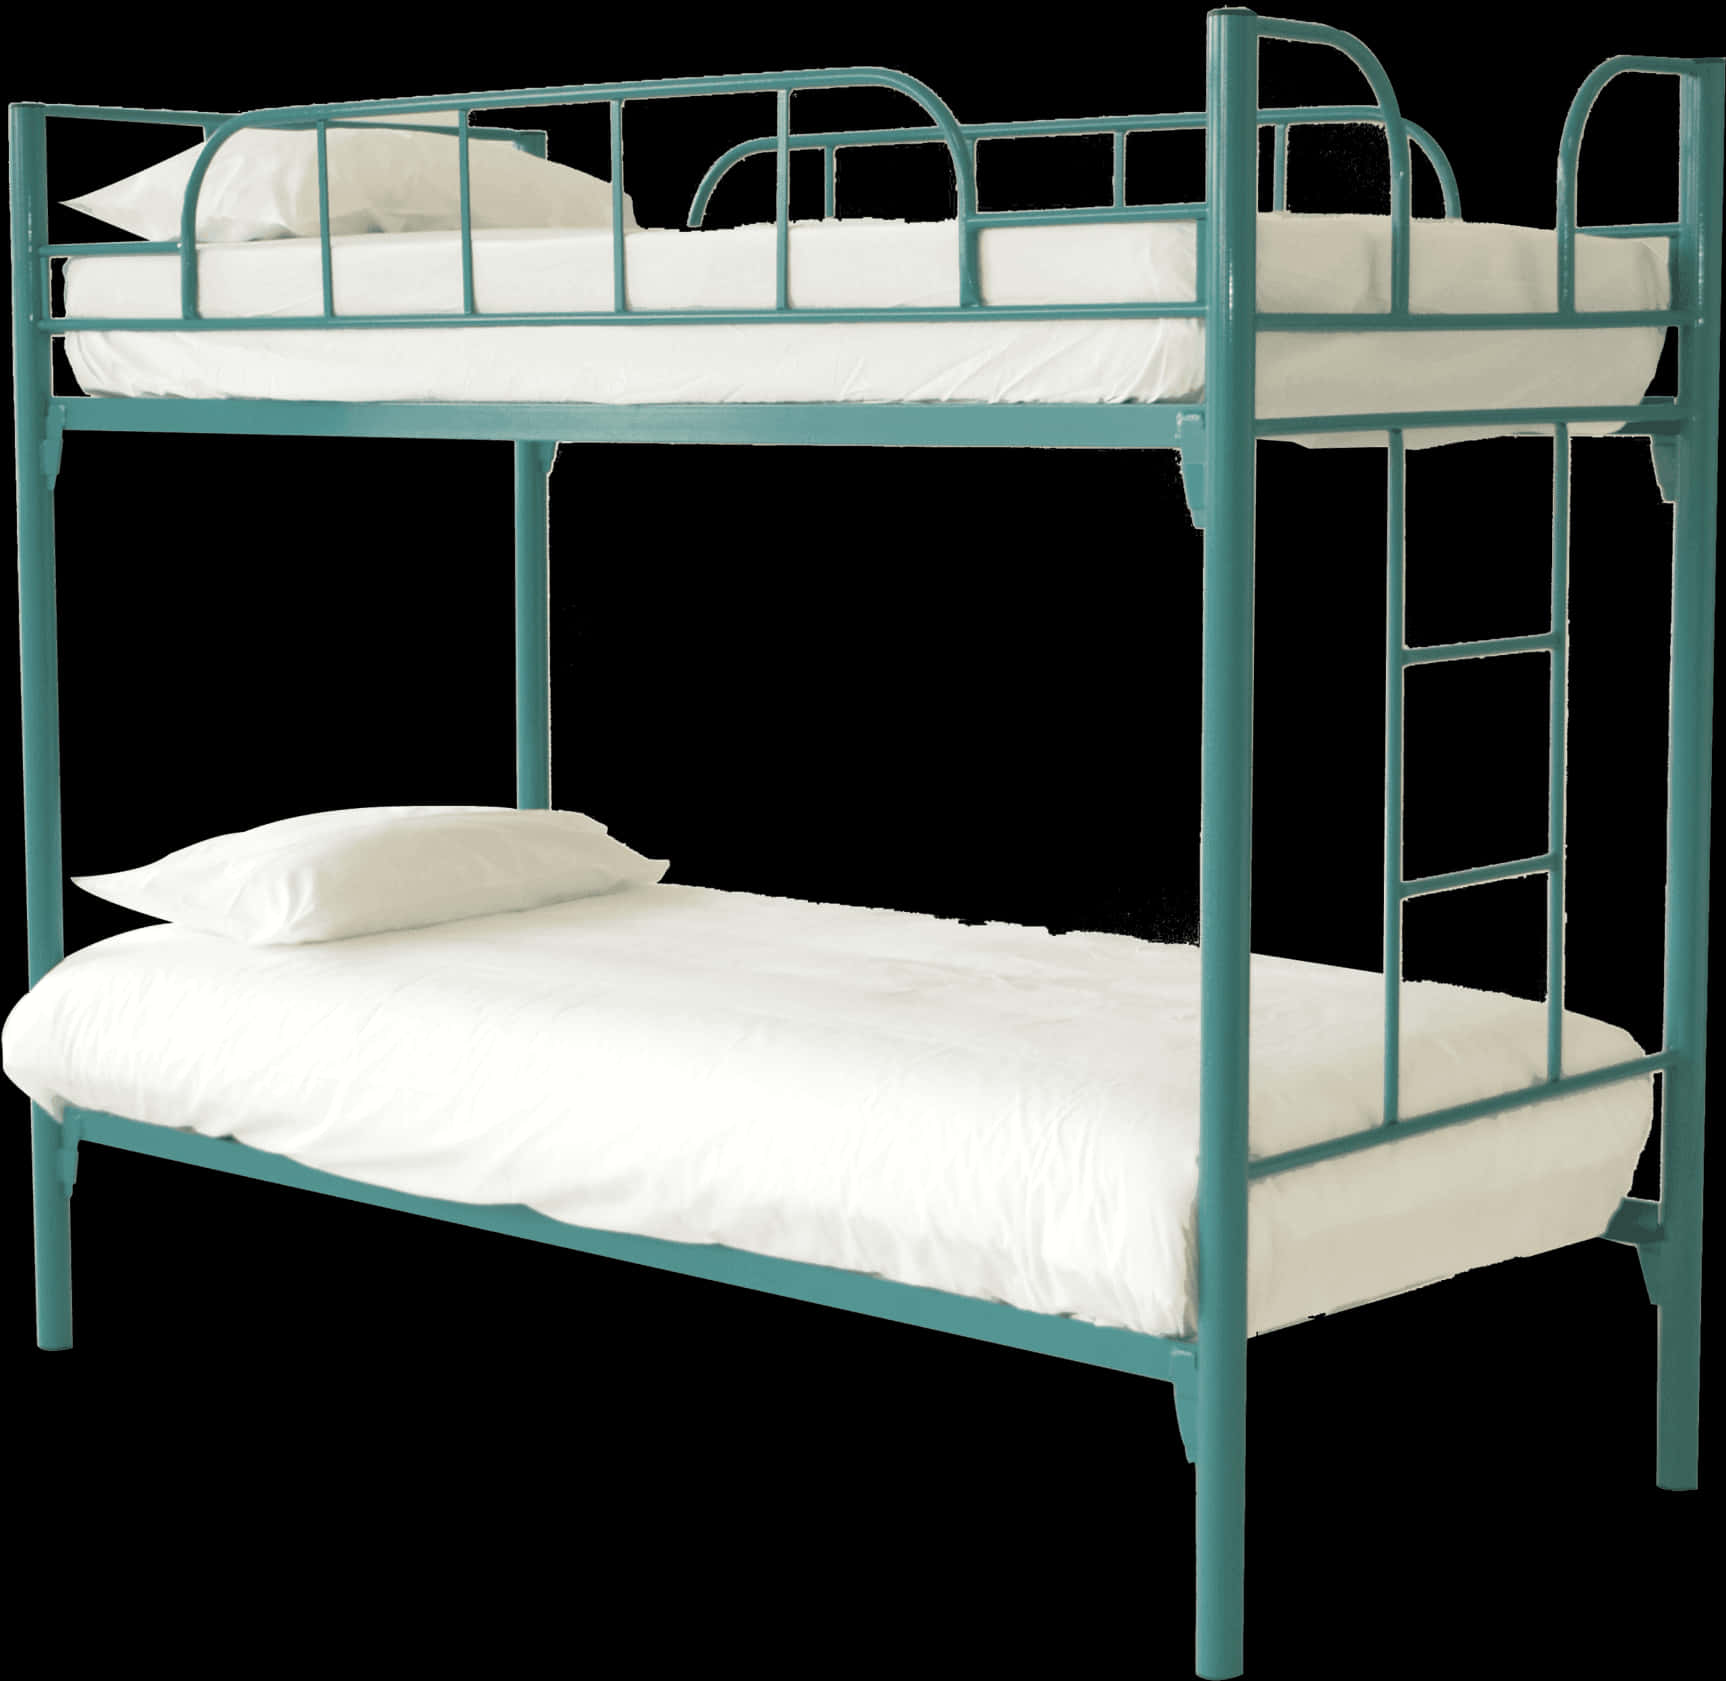 A Bunk Bed With A Ladder